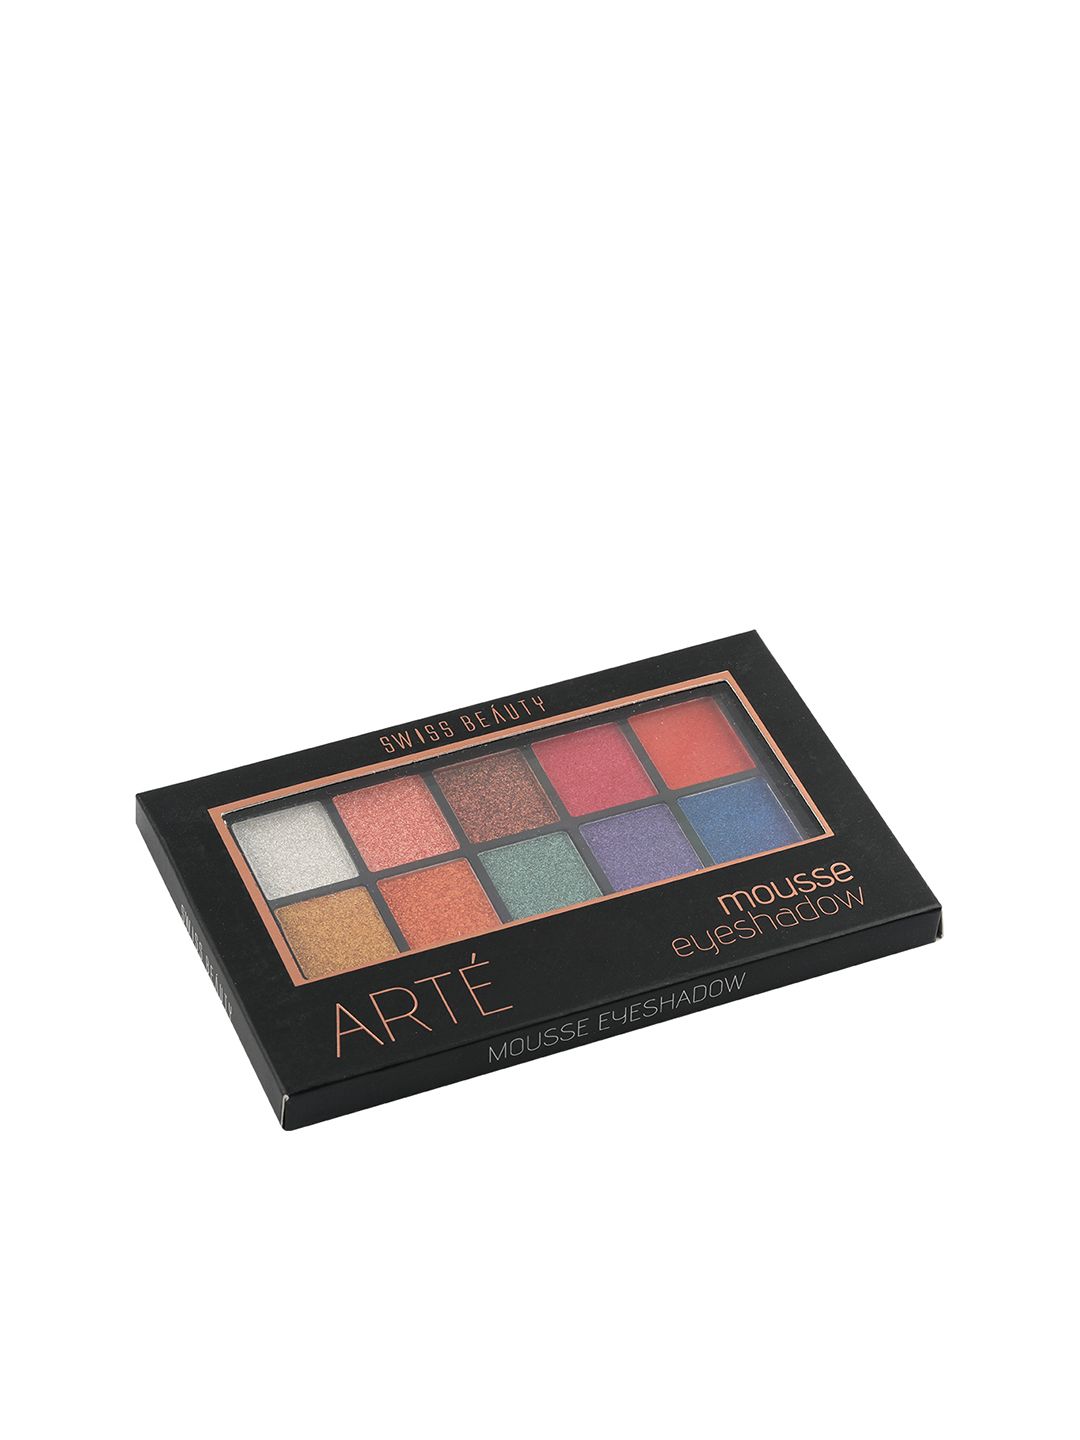 SWISS BEAUTY Arte Mousse Eyeshadow Palette - Shade 1 Price in India